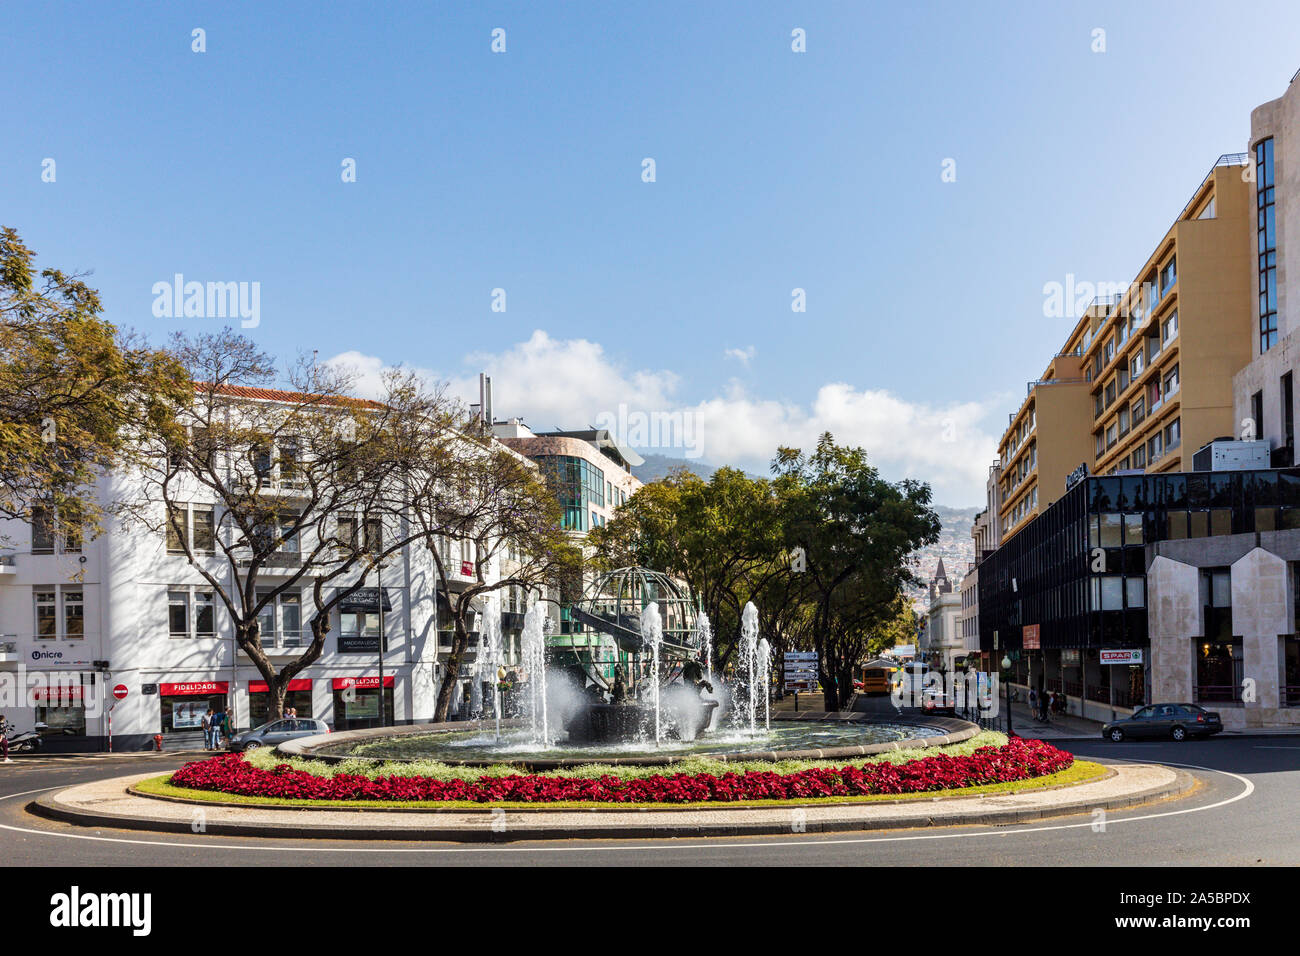 Rotunda de Infante, a roundabout with fountains and red flowers in Funchal, Madeira, Portugal Stock Photo